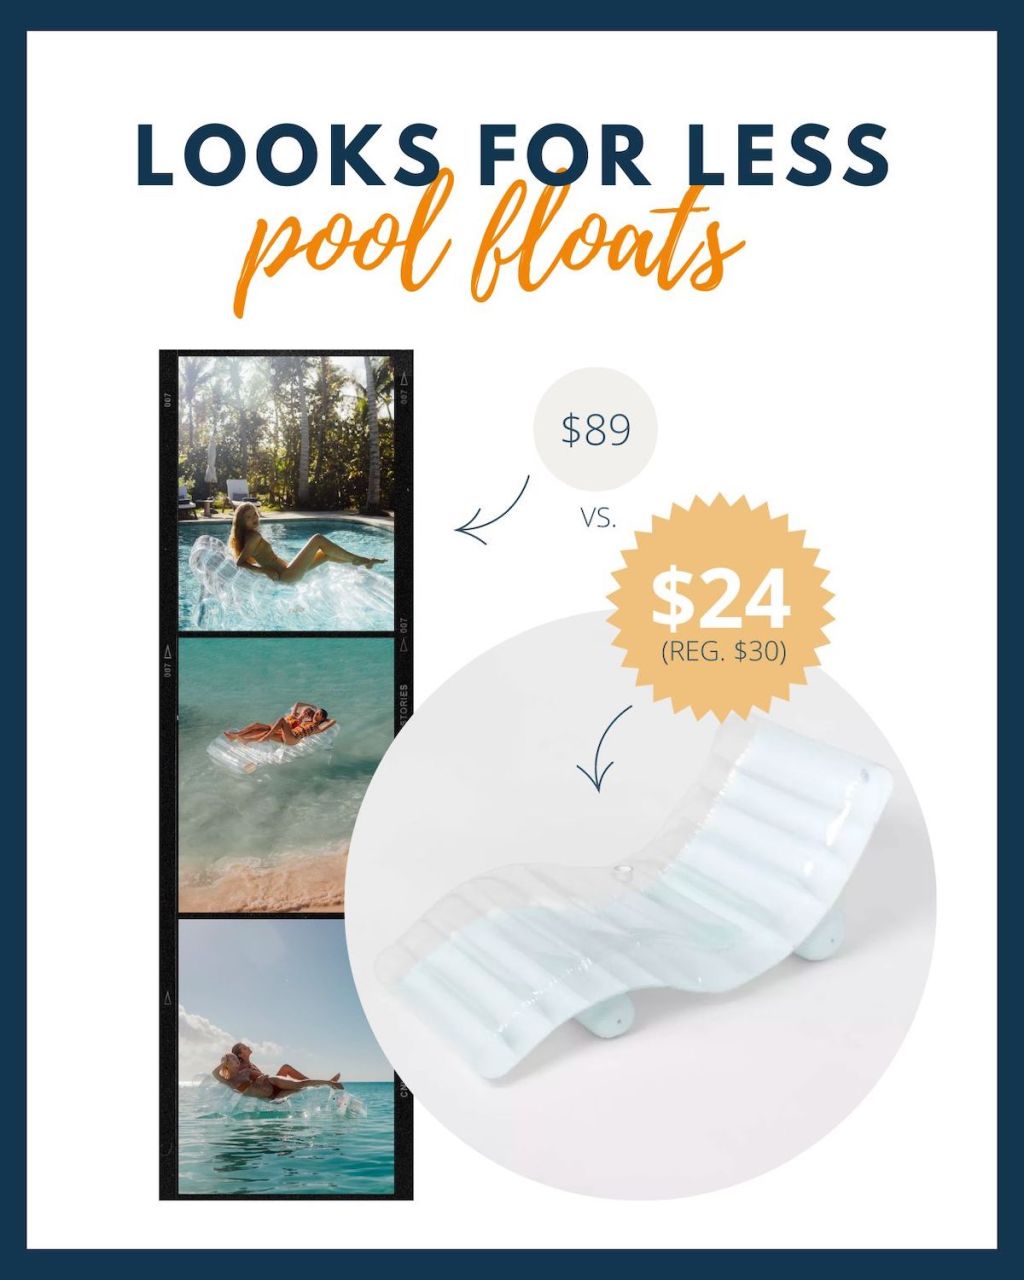 graphic with stock photos of clear pool floats 